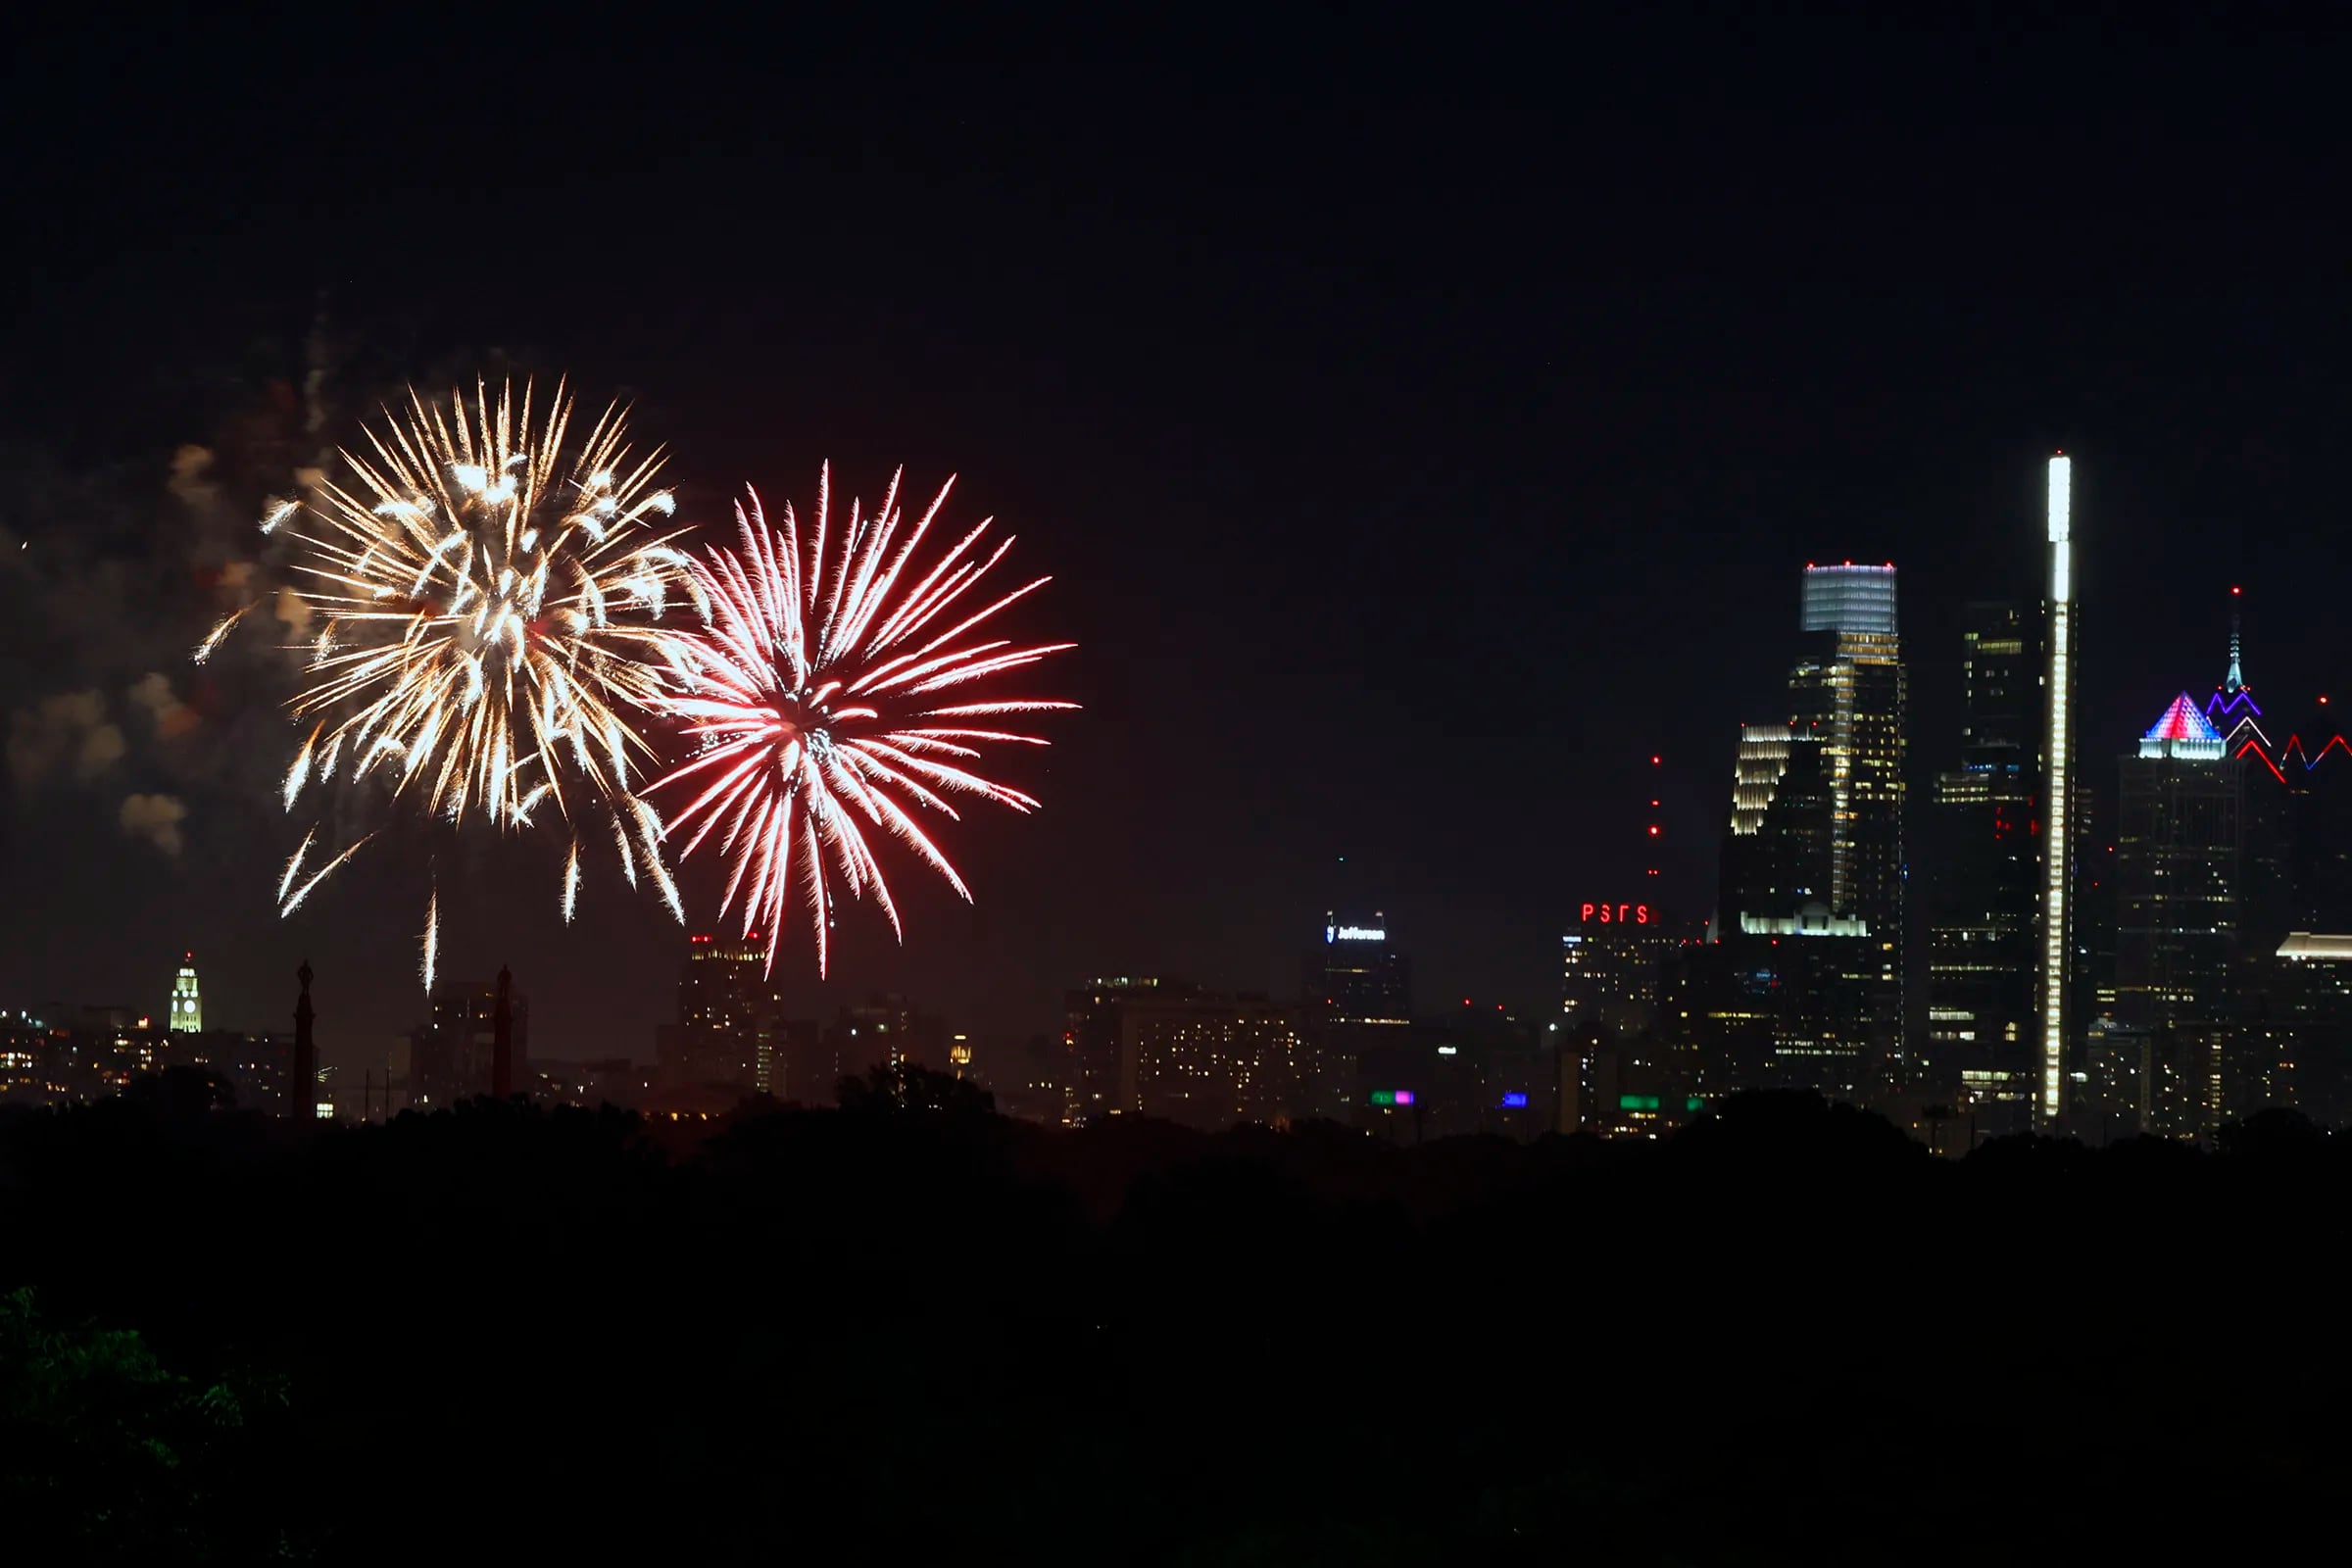 Fireworks at the Art Museum and across the city seen from the Mann Center for the Performing Arts in Phila., Pa. on July 4, 2021.